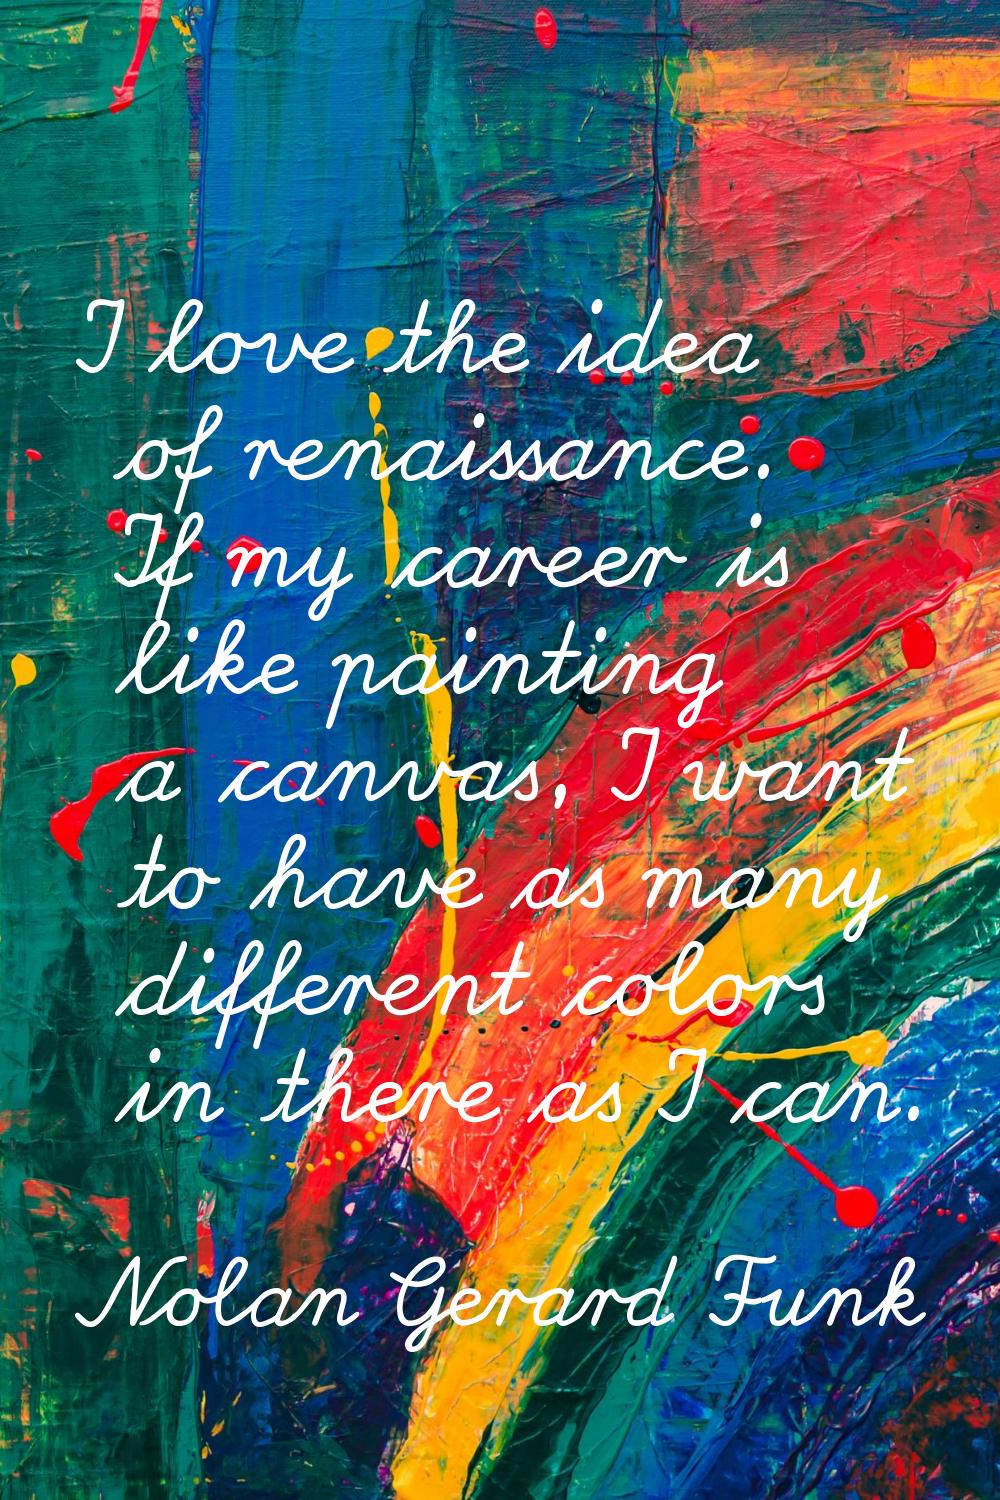 I love the idea of renaissance. If my career is like painting a canvas, I want to have as many diff